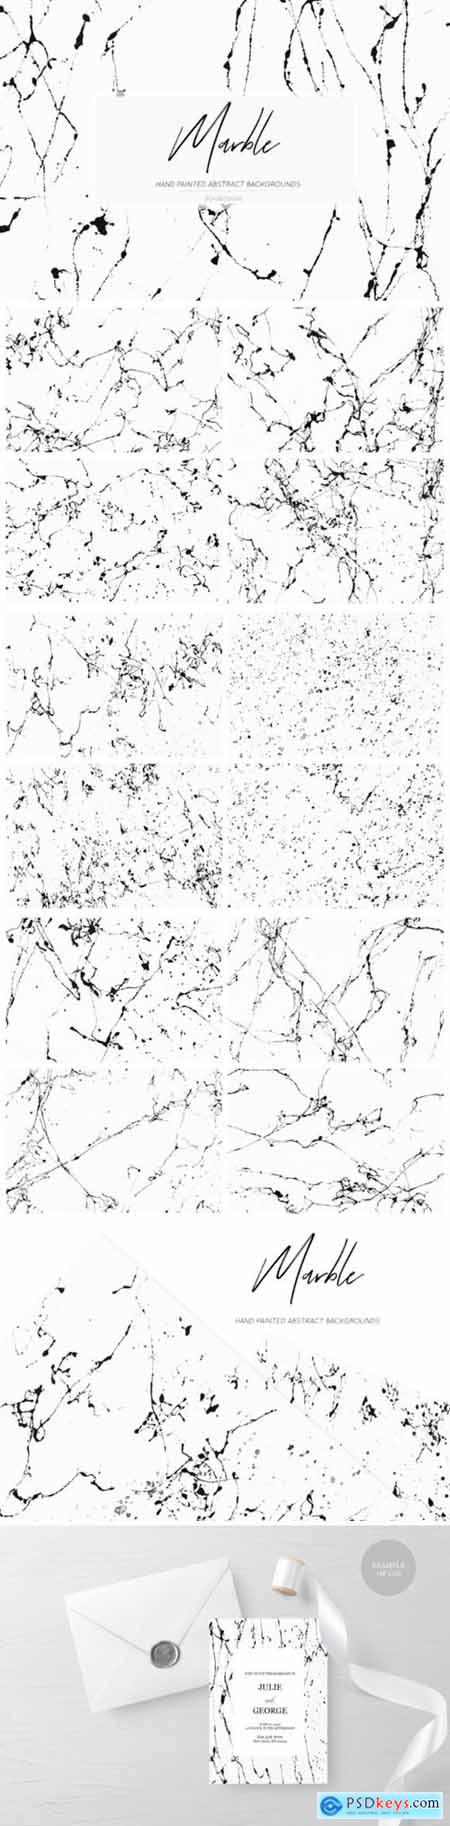 Black White Marble Backgrounds 1670078